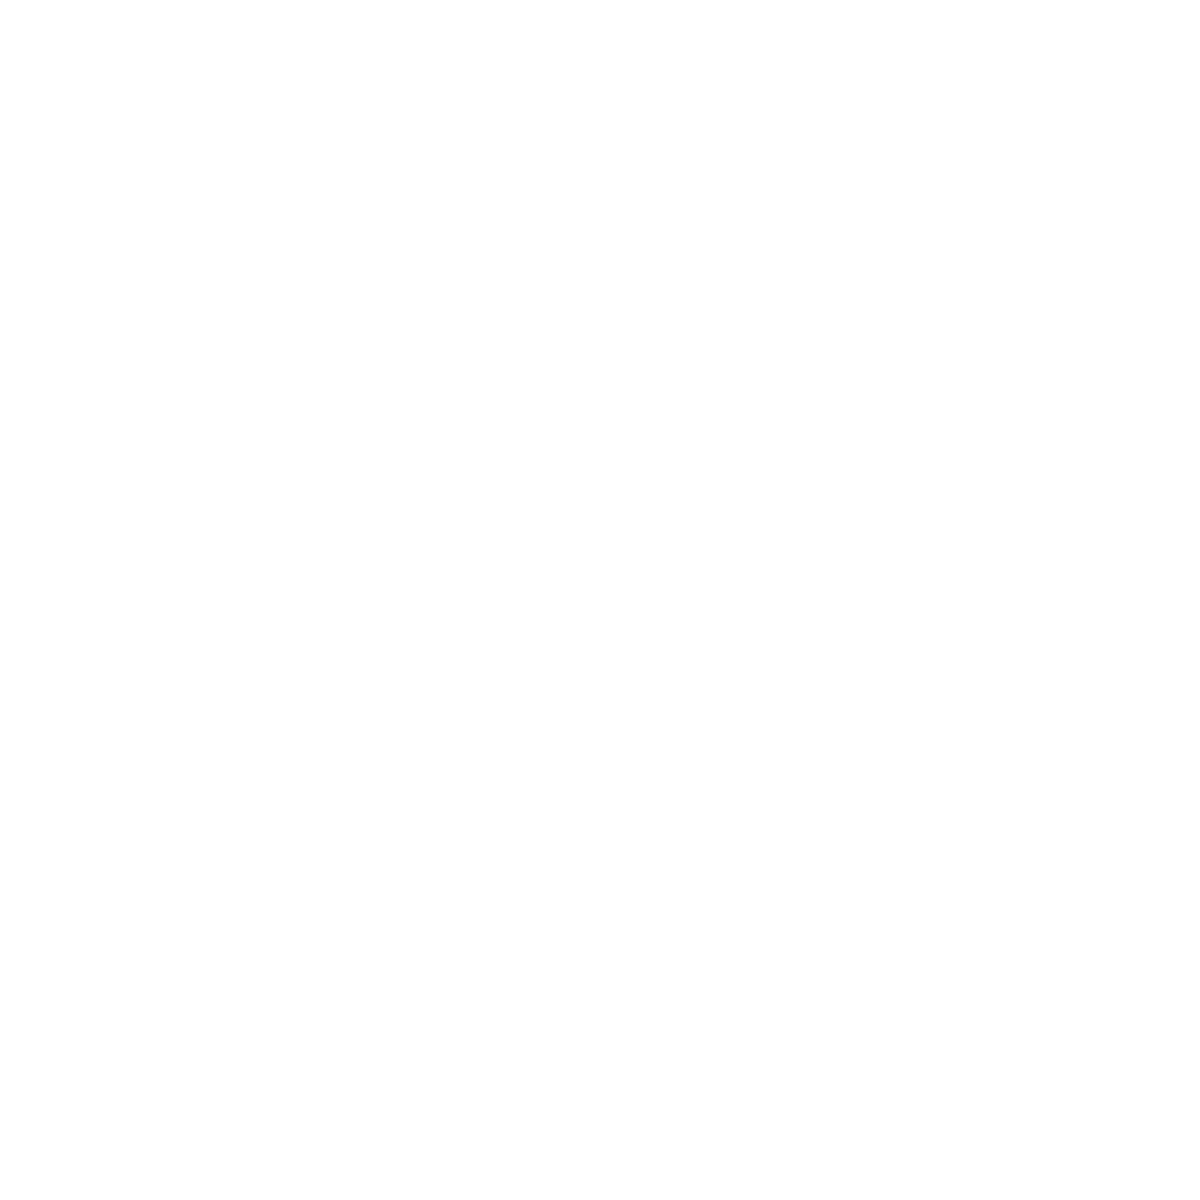 Dataction.png